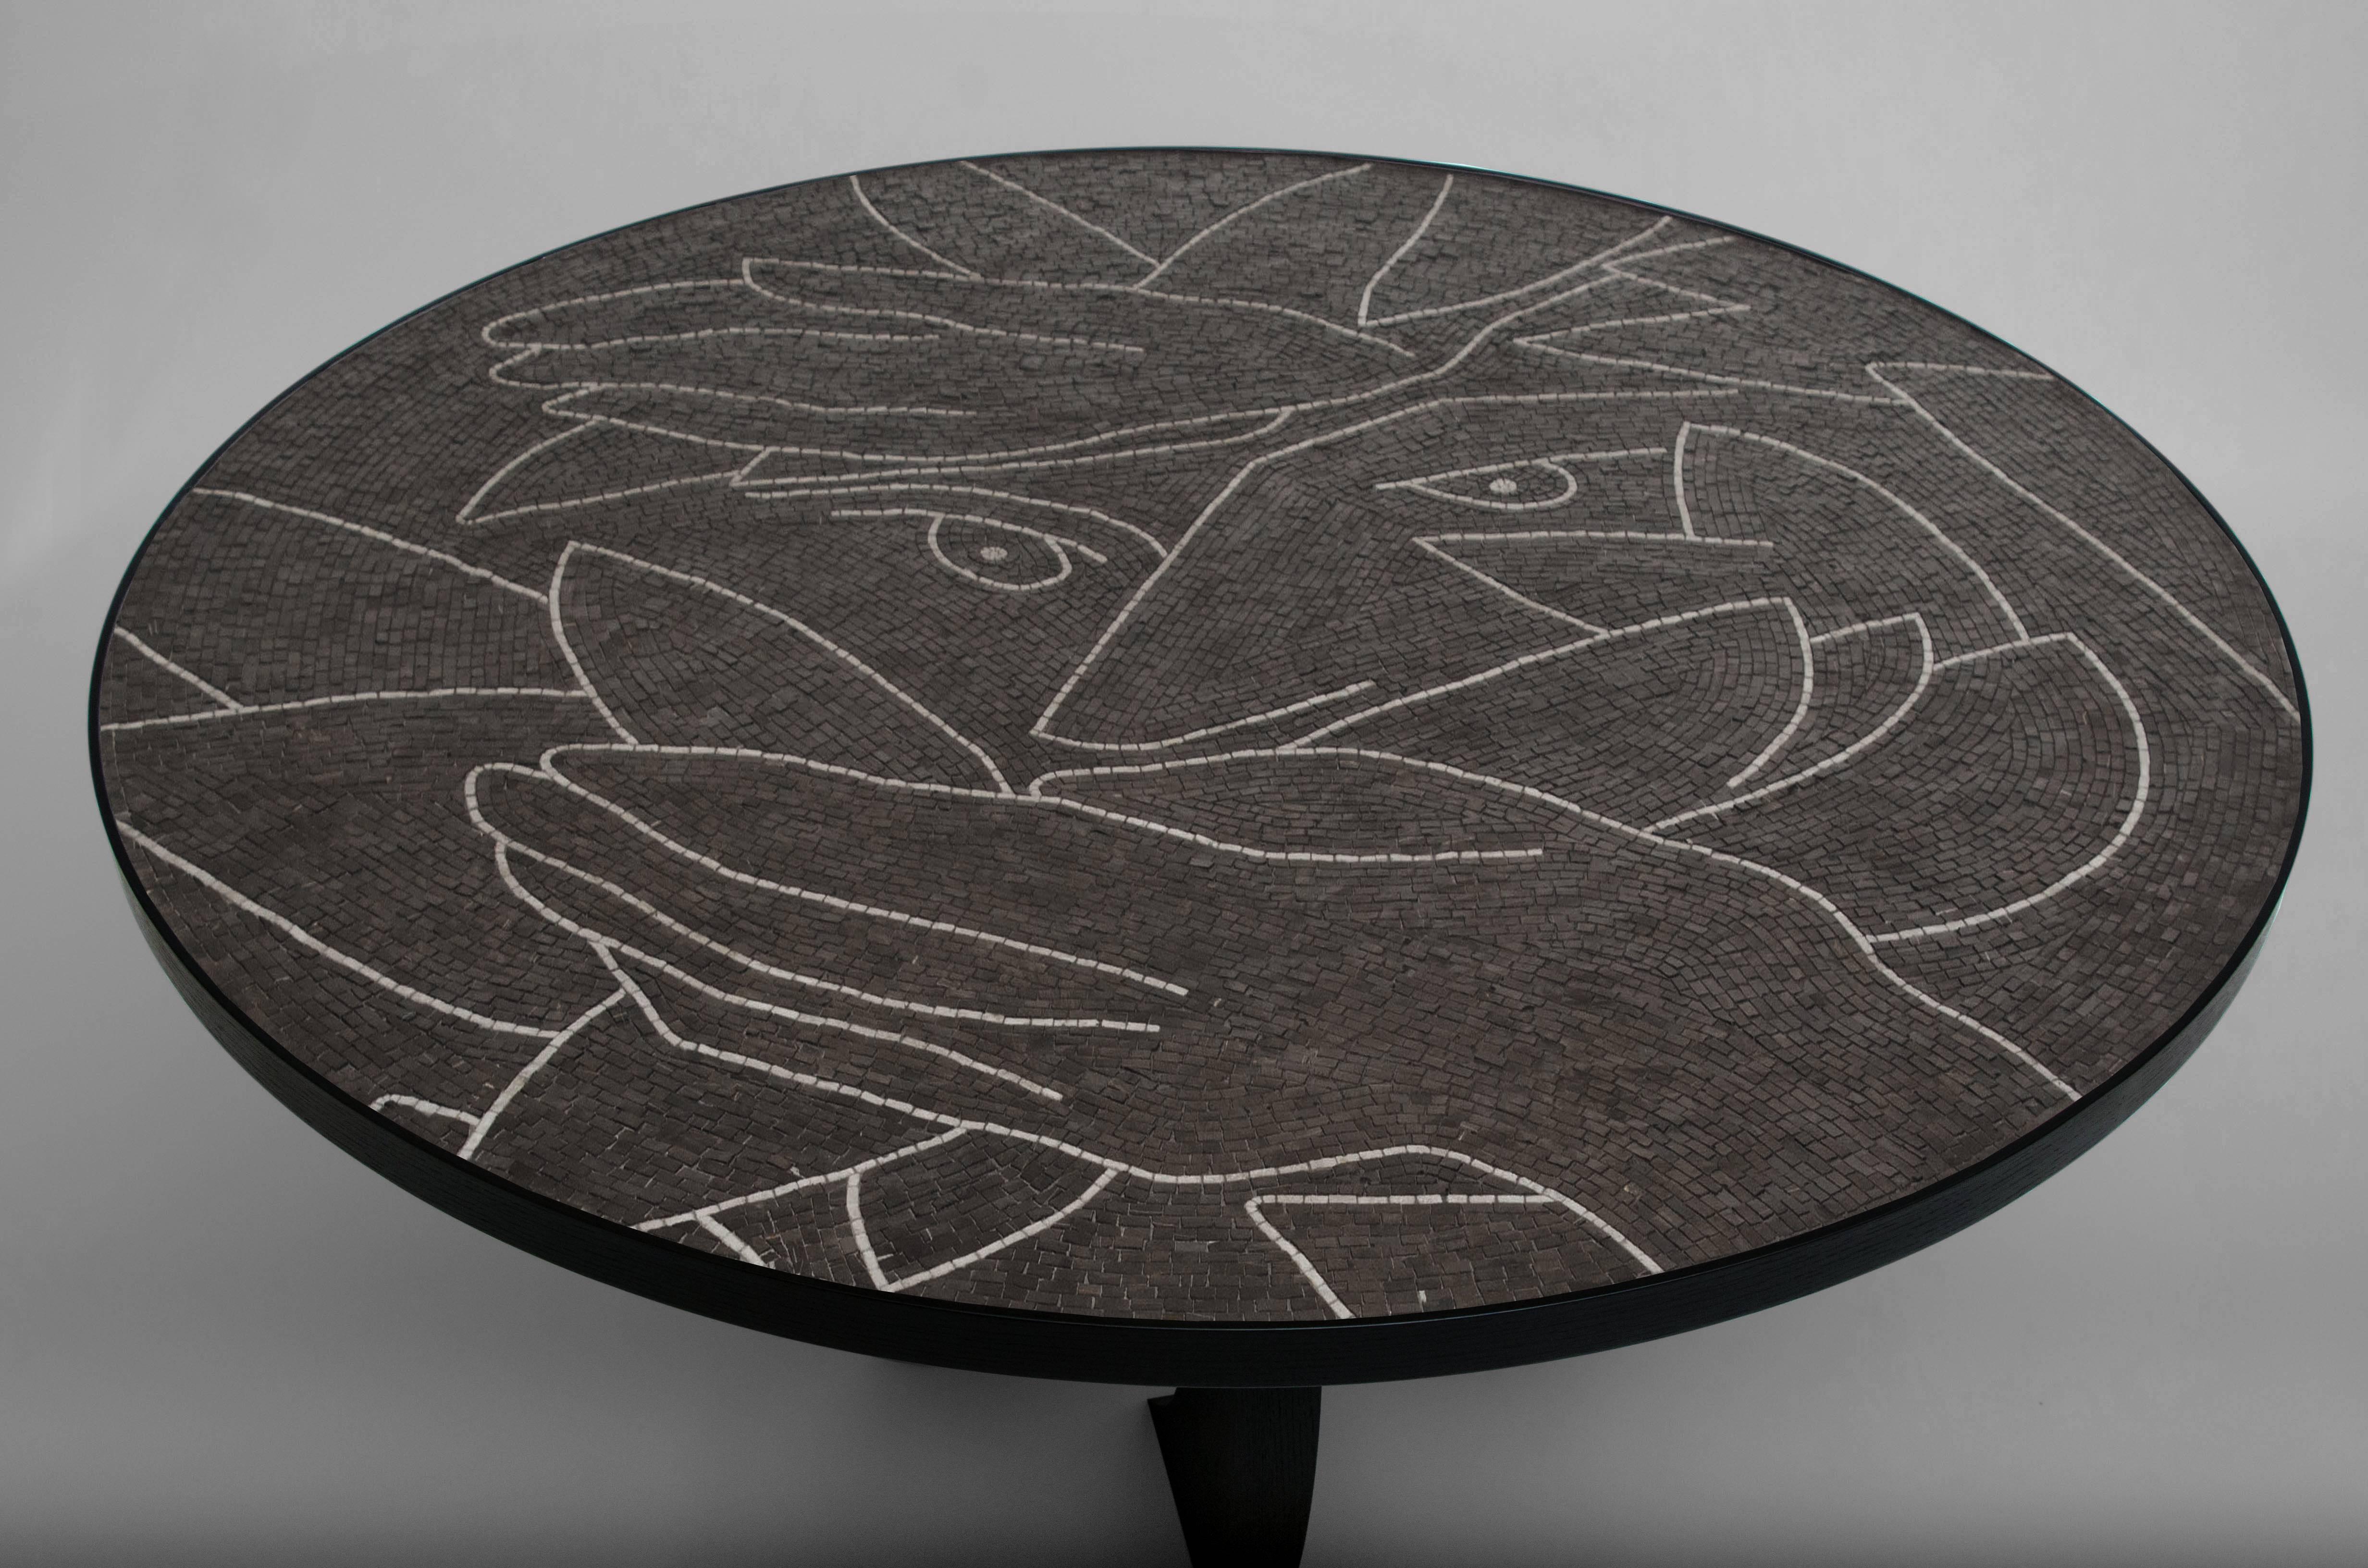 Table featuring custom hand-cut stone mosaic top in Nero Marquina and Bottocino marble with black stained wood base by Kelly Behun studio.
Measures: 72